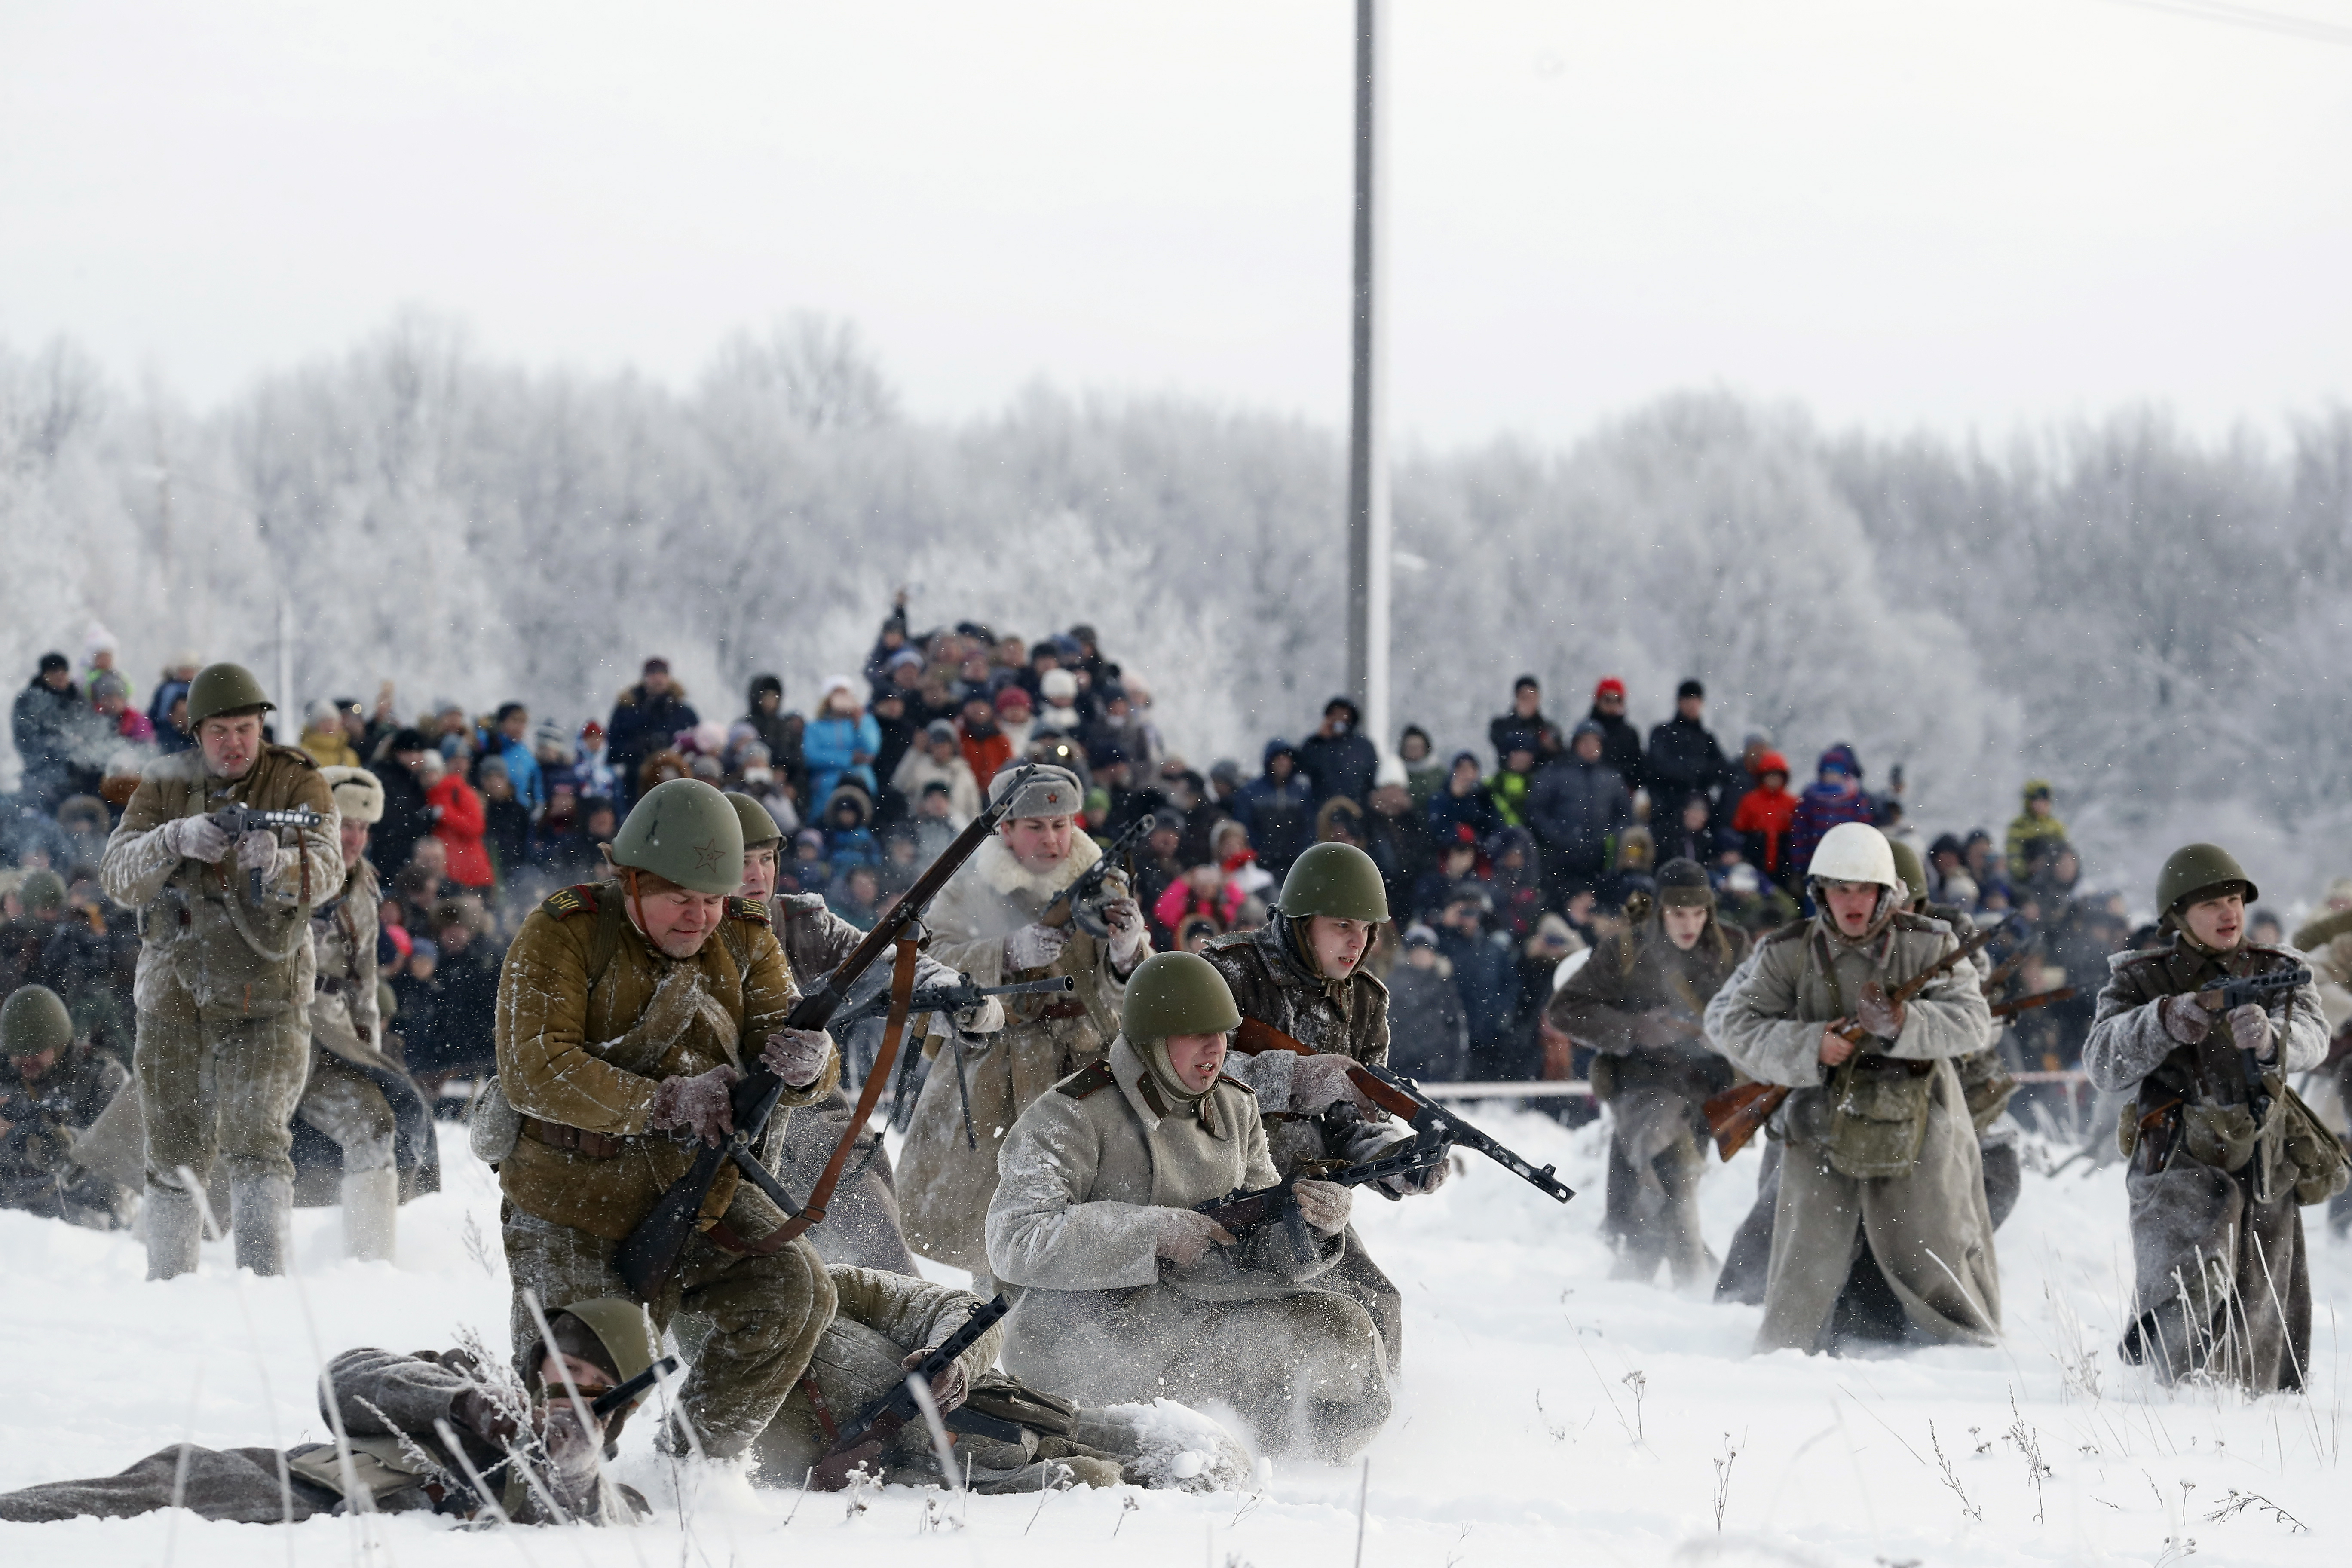 epa07300156 Members of a historical military clubs, wearing Soviet and Nazi uniforms, participate in the World War II battle reenactment, marking the 75th anniversary of the end of the Siege of Leningrad during World War II, near Krasnoe Selo, outside St. Petersburg, Russia, 19 January 2019. Russian people mark the 75th anniversary of the end of the Leningrad Blockade during World War II on January 27, 2019. Up to 700,000 civilians are believed to have died from hunger, frost, shelling and air bombardment during the siege that lasted some 900 days.  EPA/ANATOLY MALTSEV